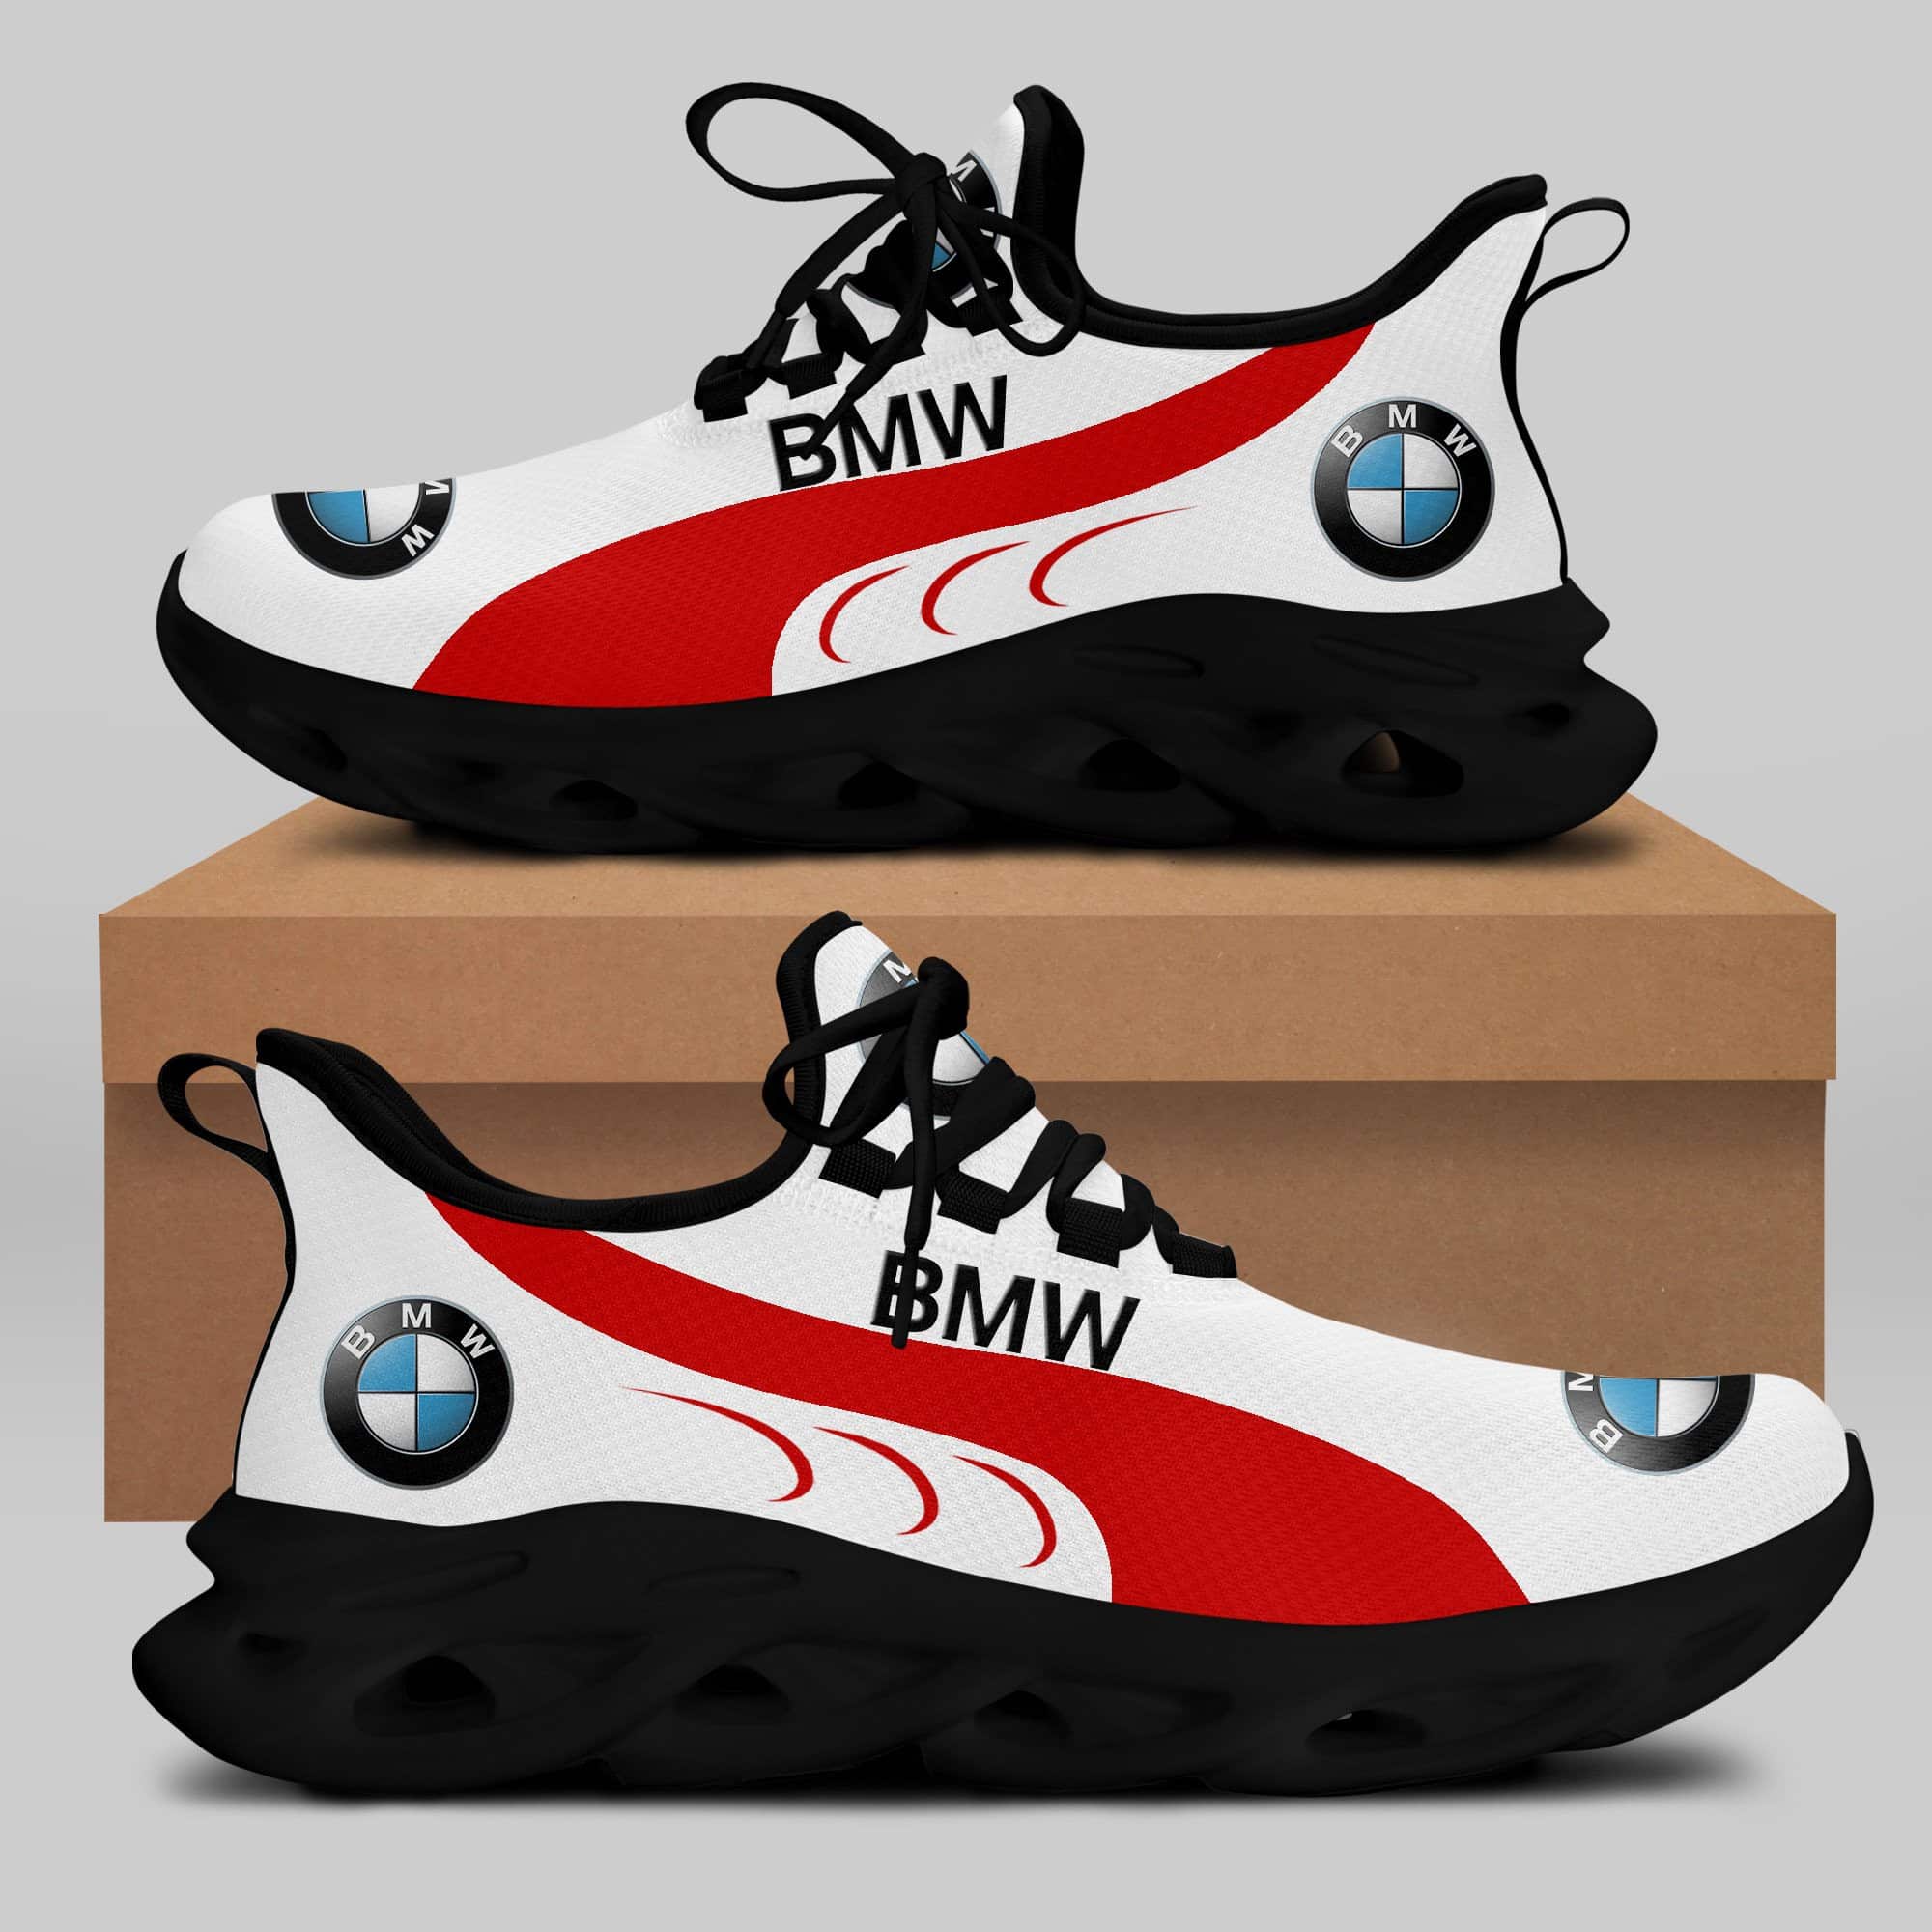 Bmw Running Shoes Max Soul Shoes Sneakers Ver 55 2